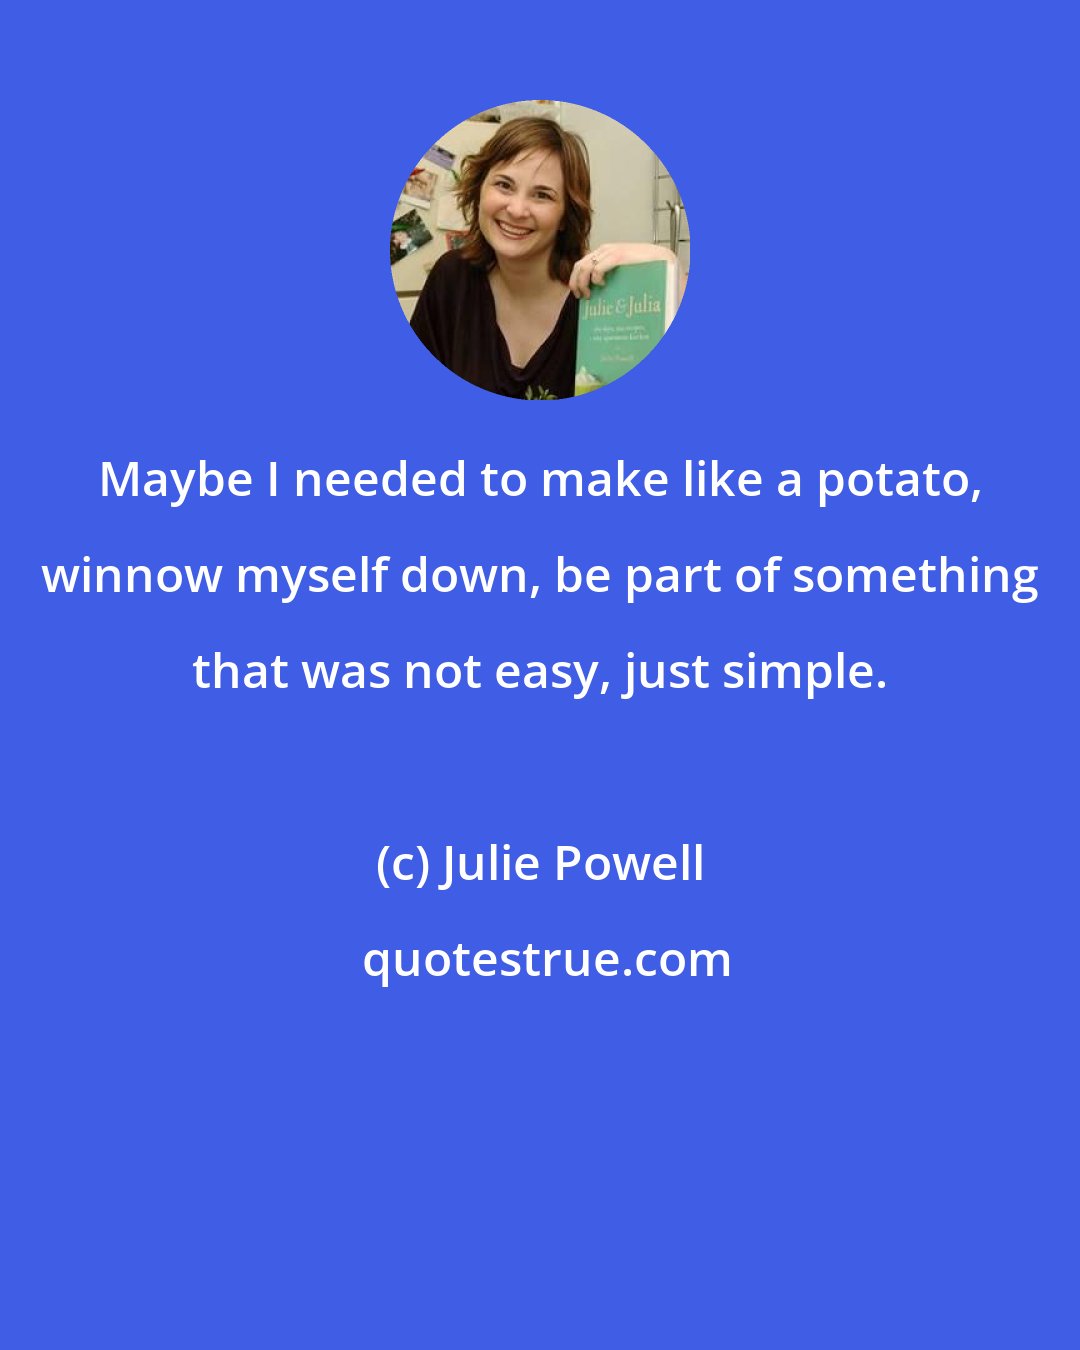 Julie Powell: Maybe I needed to make like a potato, winnow myself down, be part of something that was not easy, just simple.